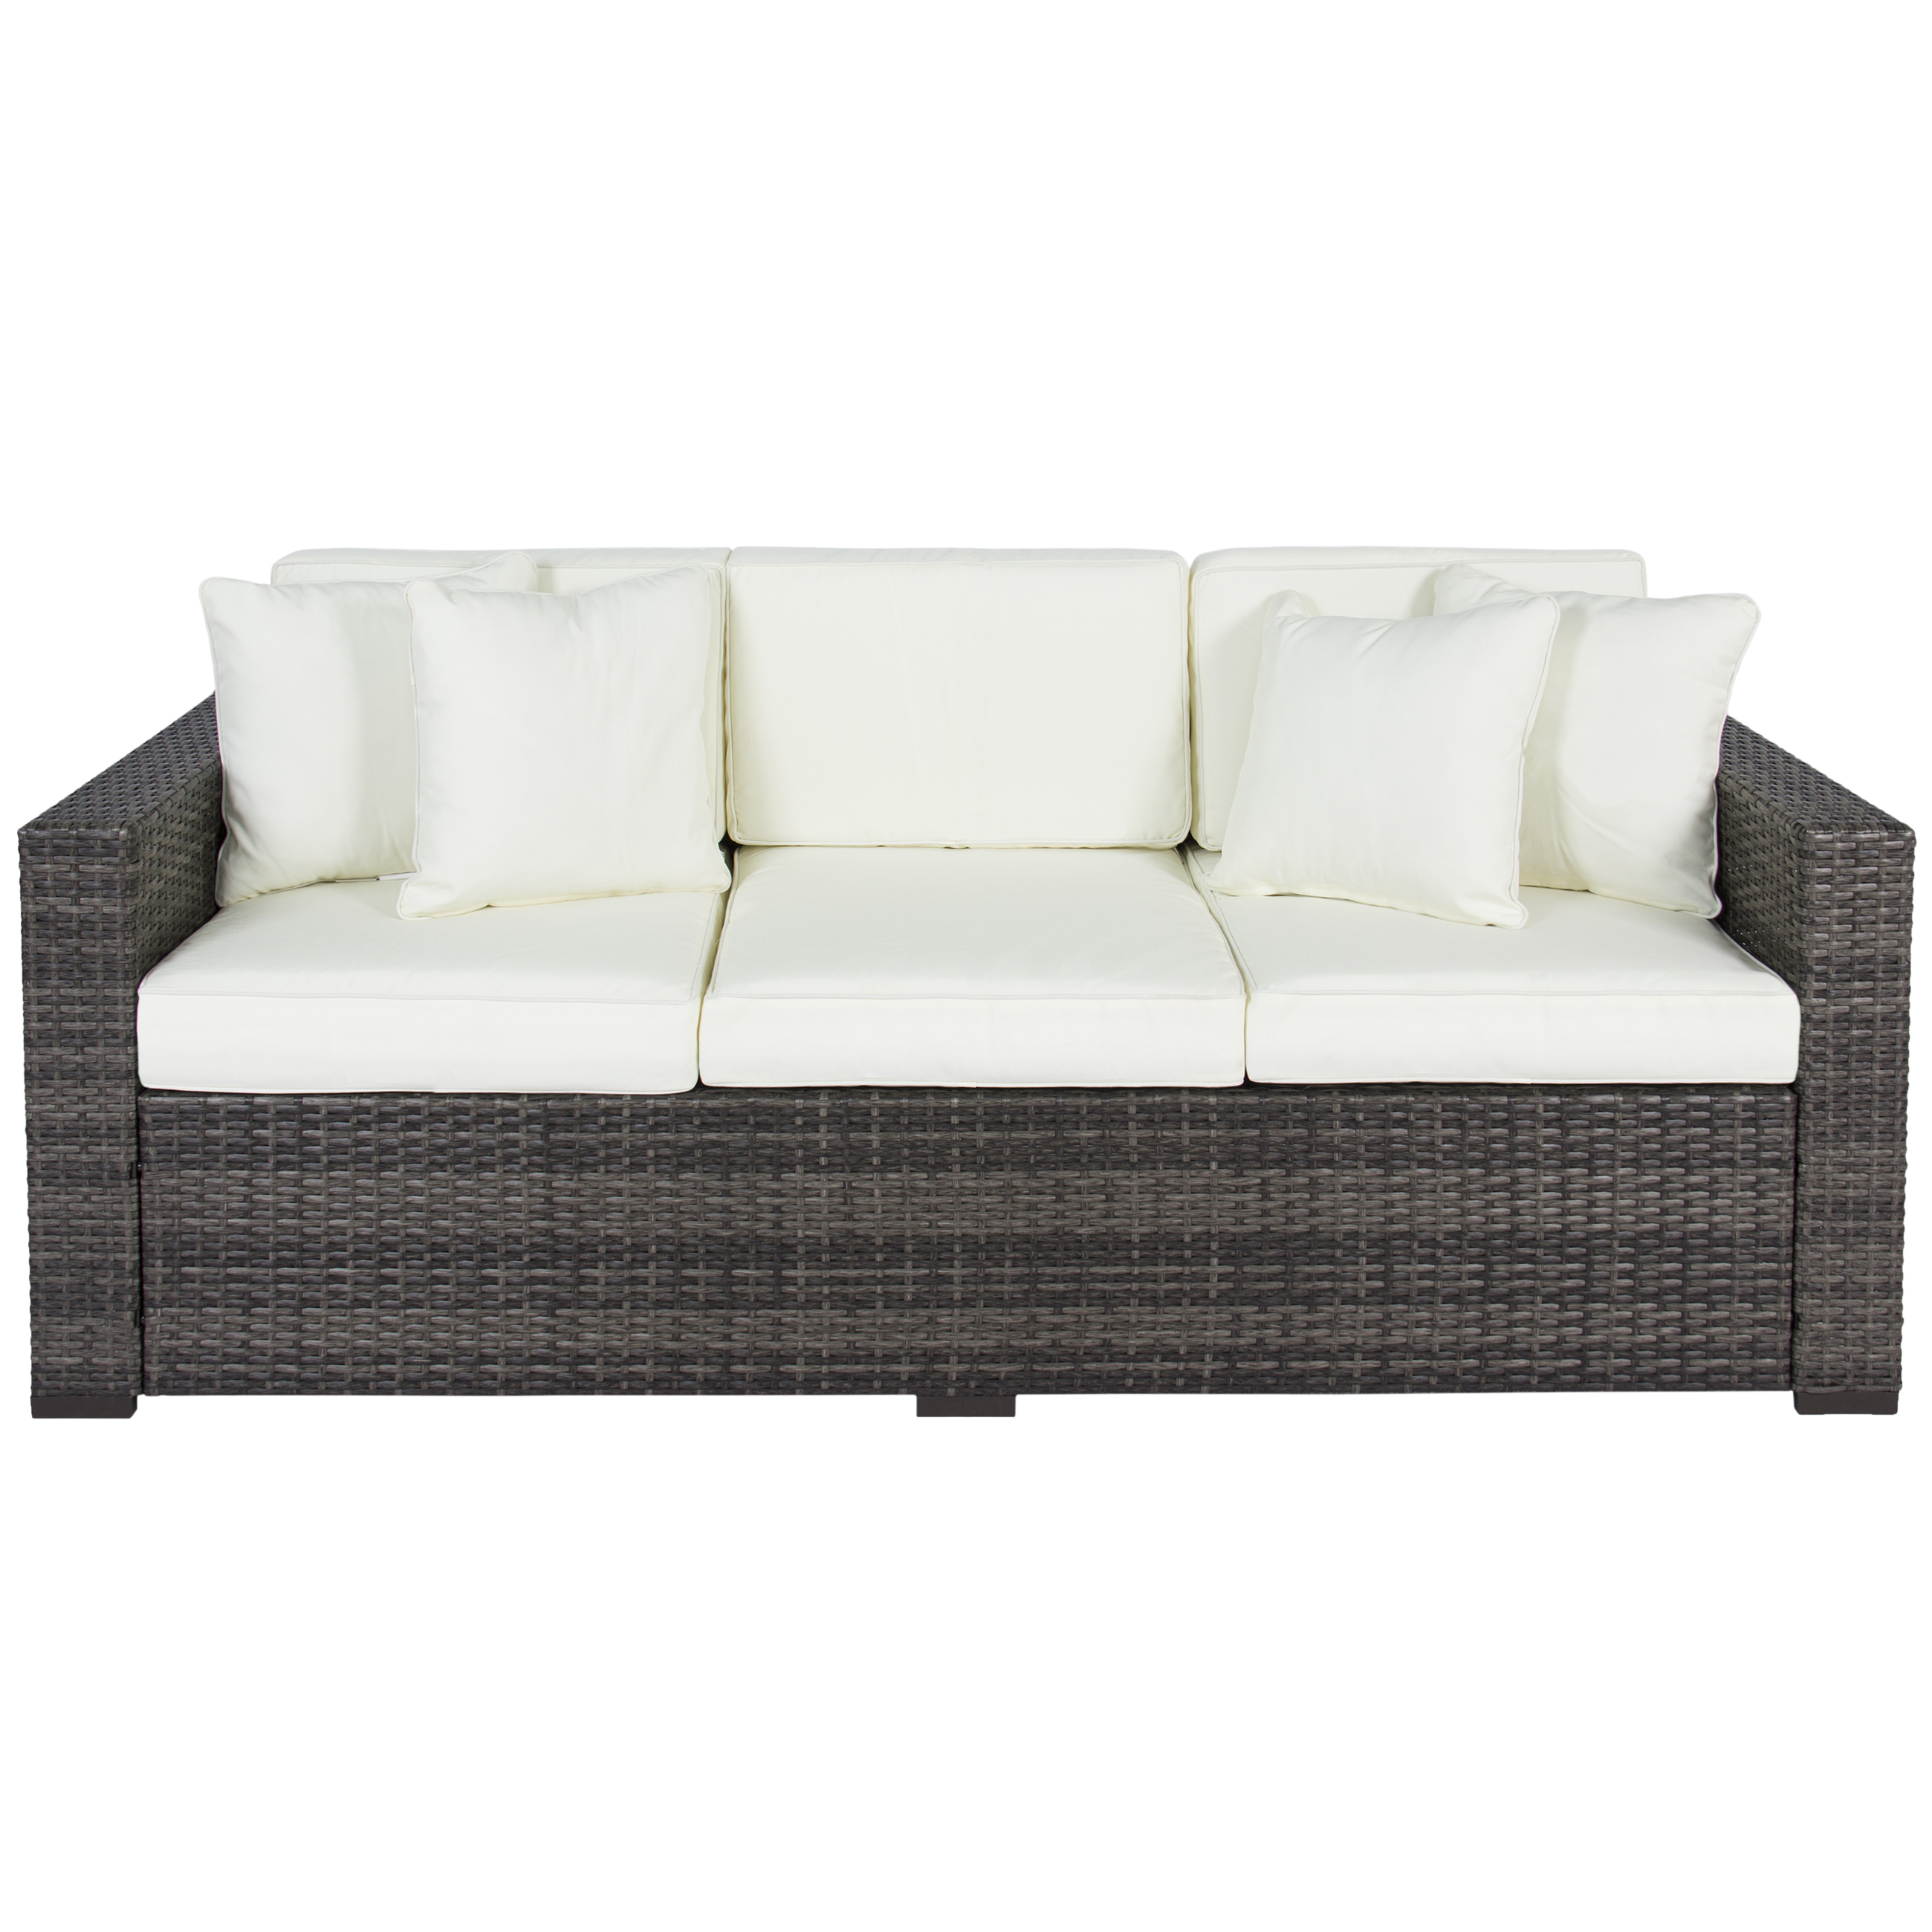 Outdoor wicker sofa bcp 3-seater wicker garden furniture sofa couch with steel frame - SSRDUZD